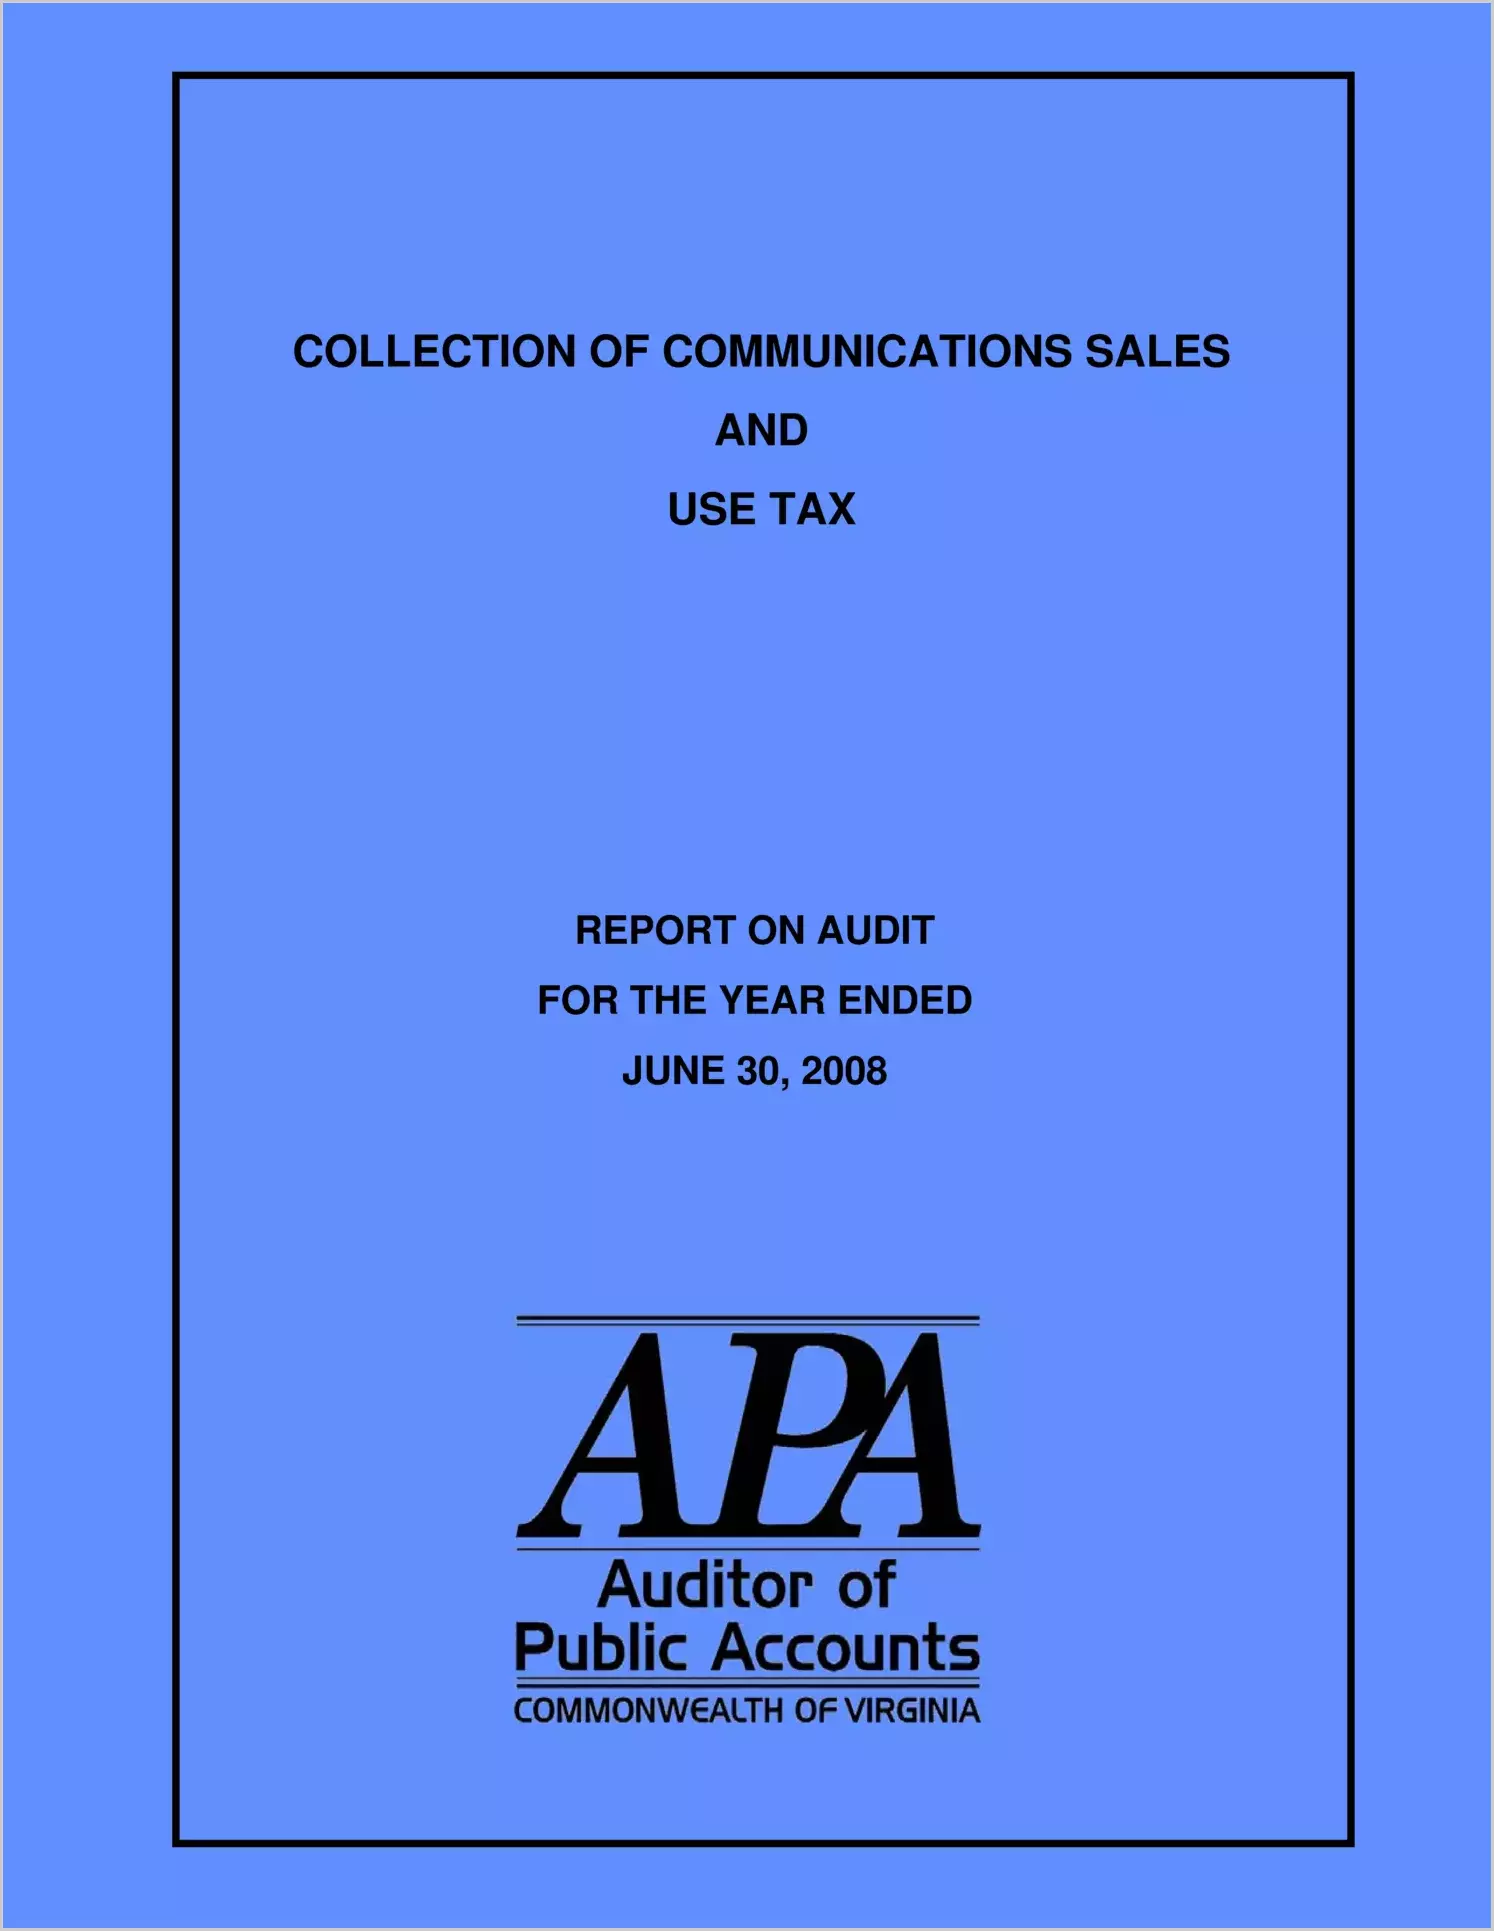 Collection of Communications Sales and Use Tax report on audit for the year ended June 30, 2008